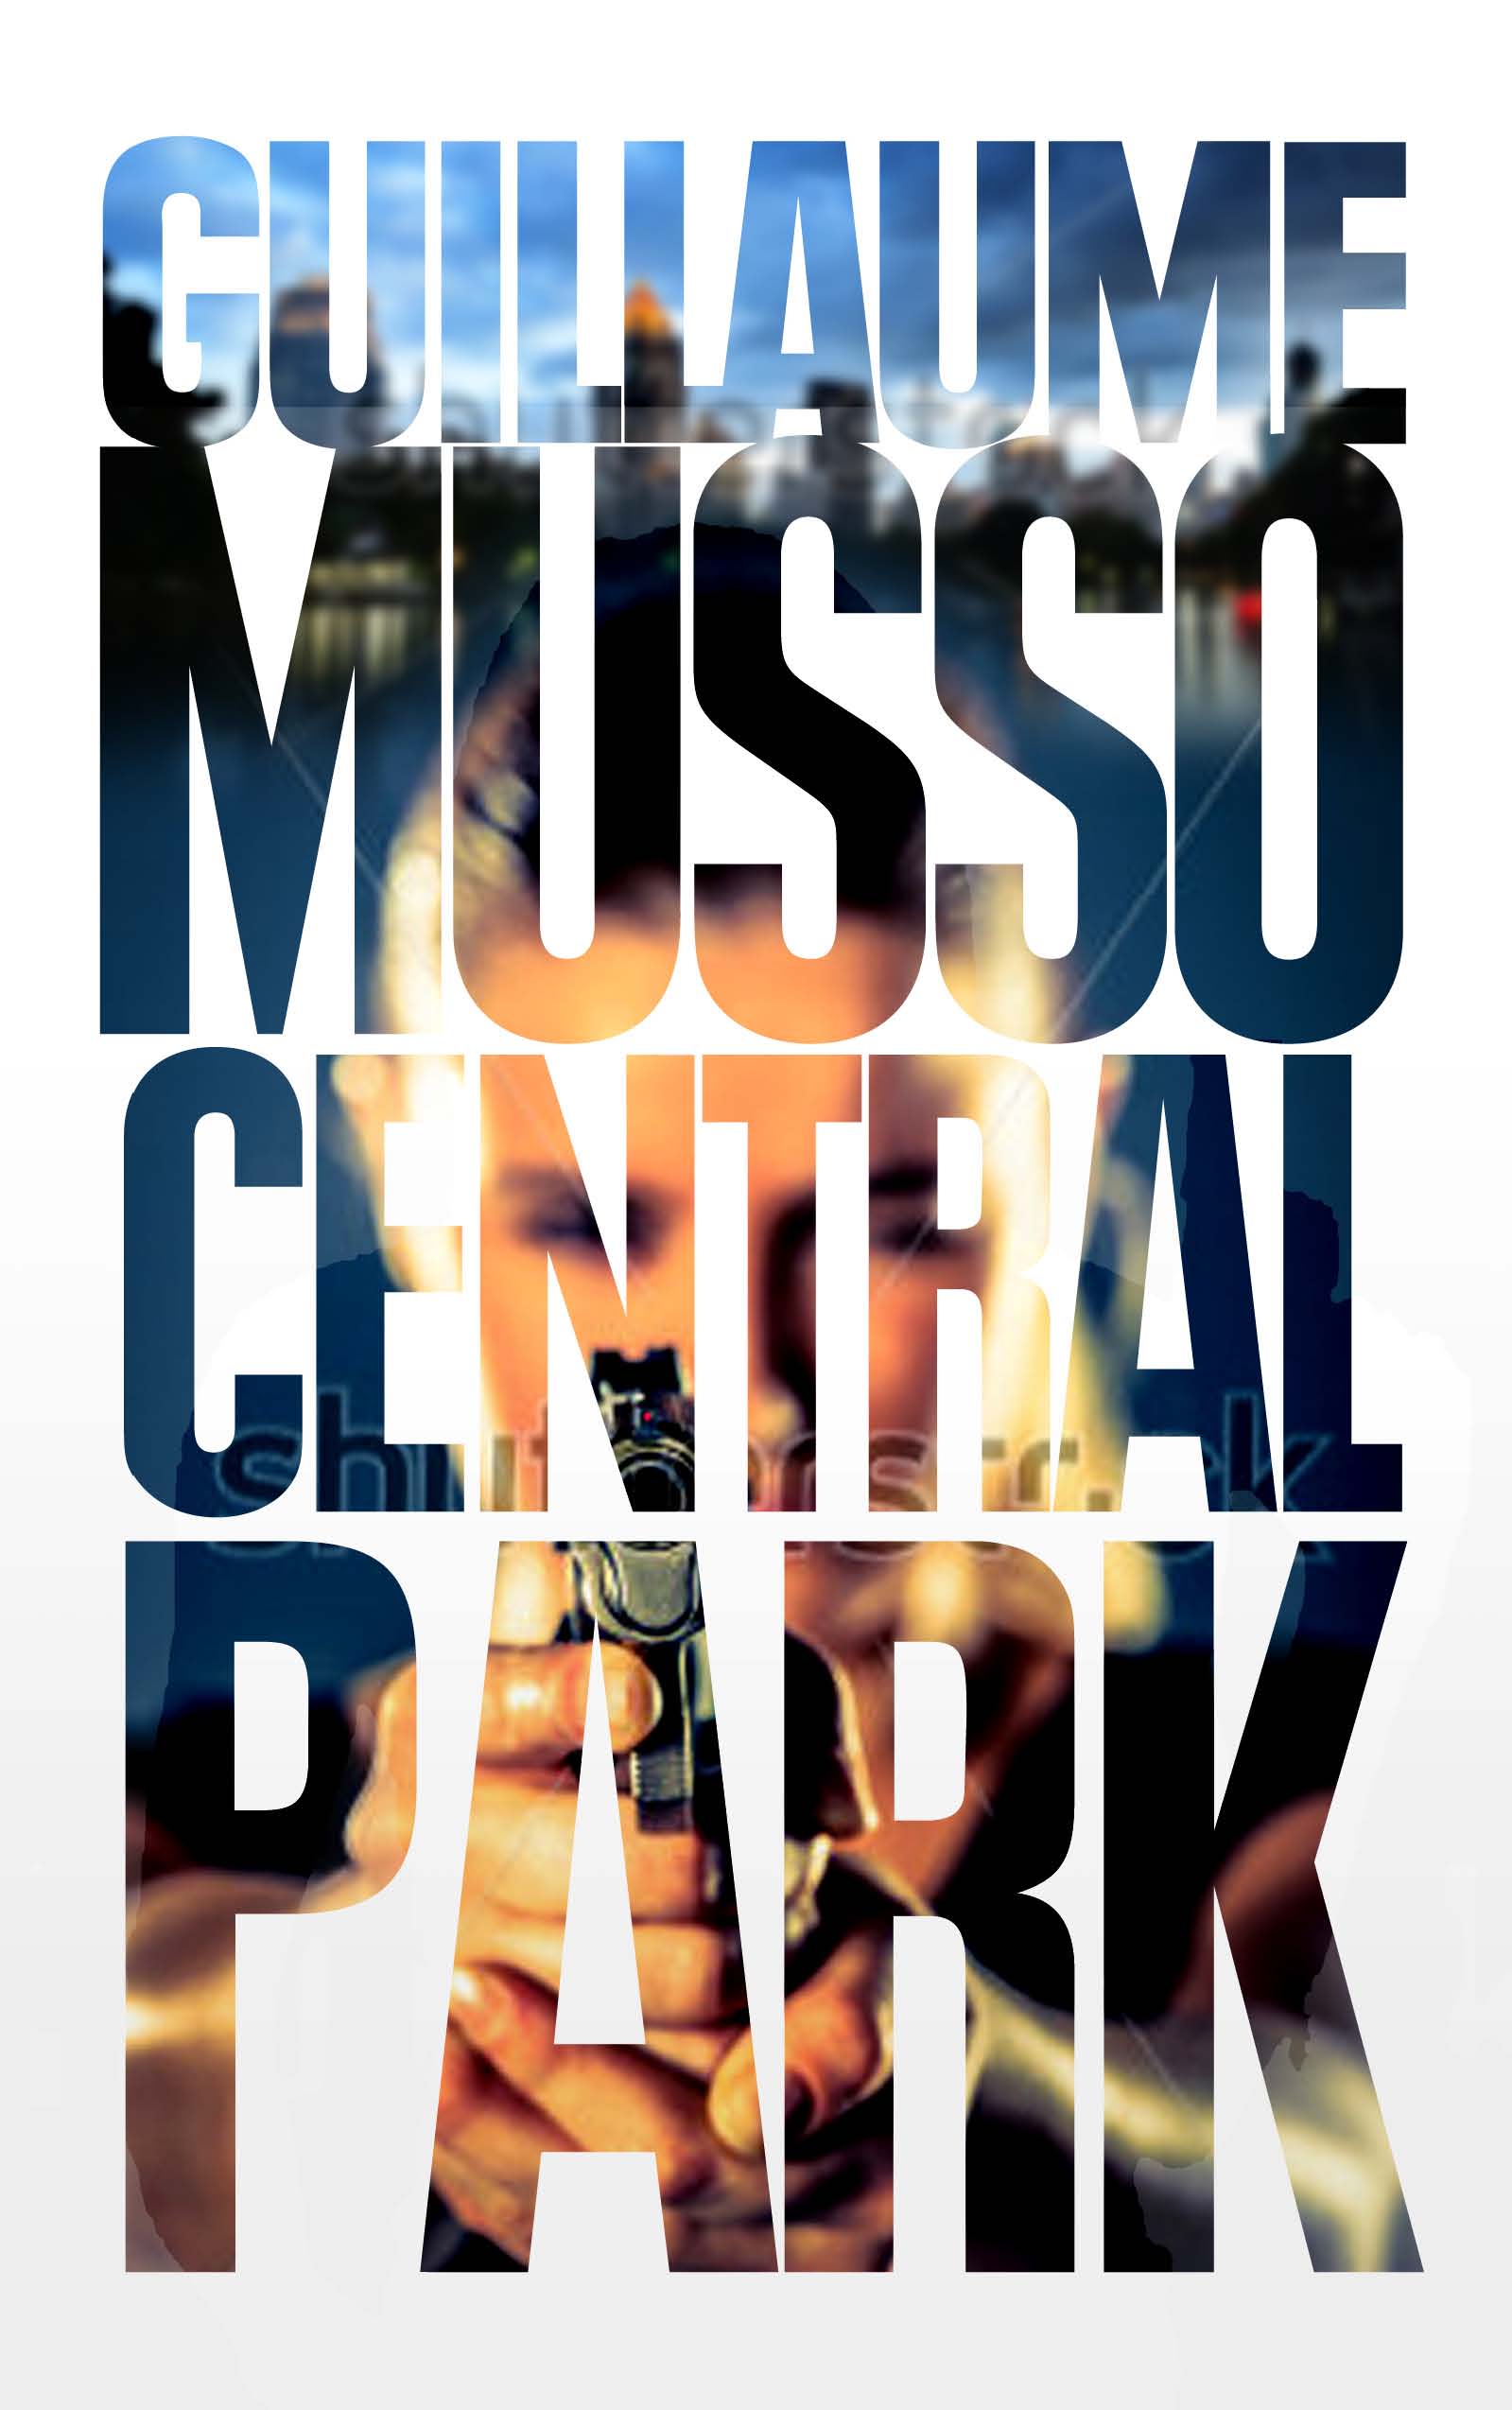 Central Park - Guillaume Musso / XO Editions / Pocket n°16290